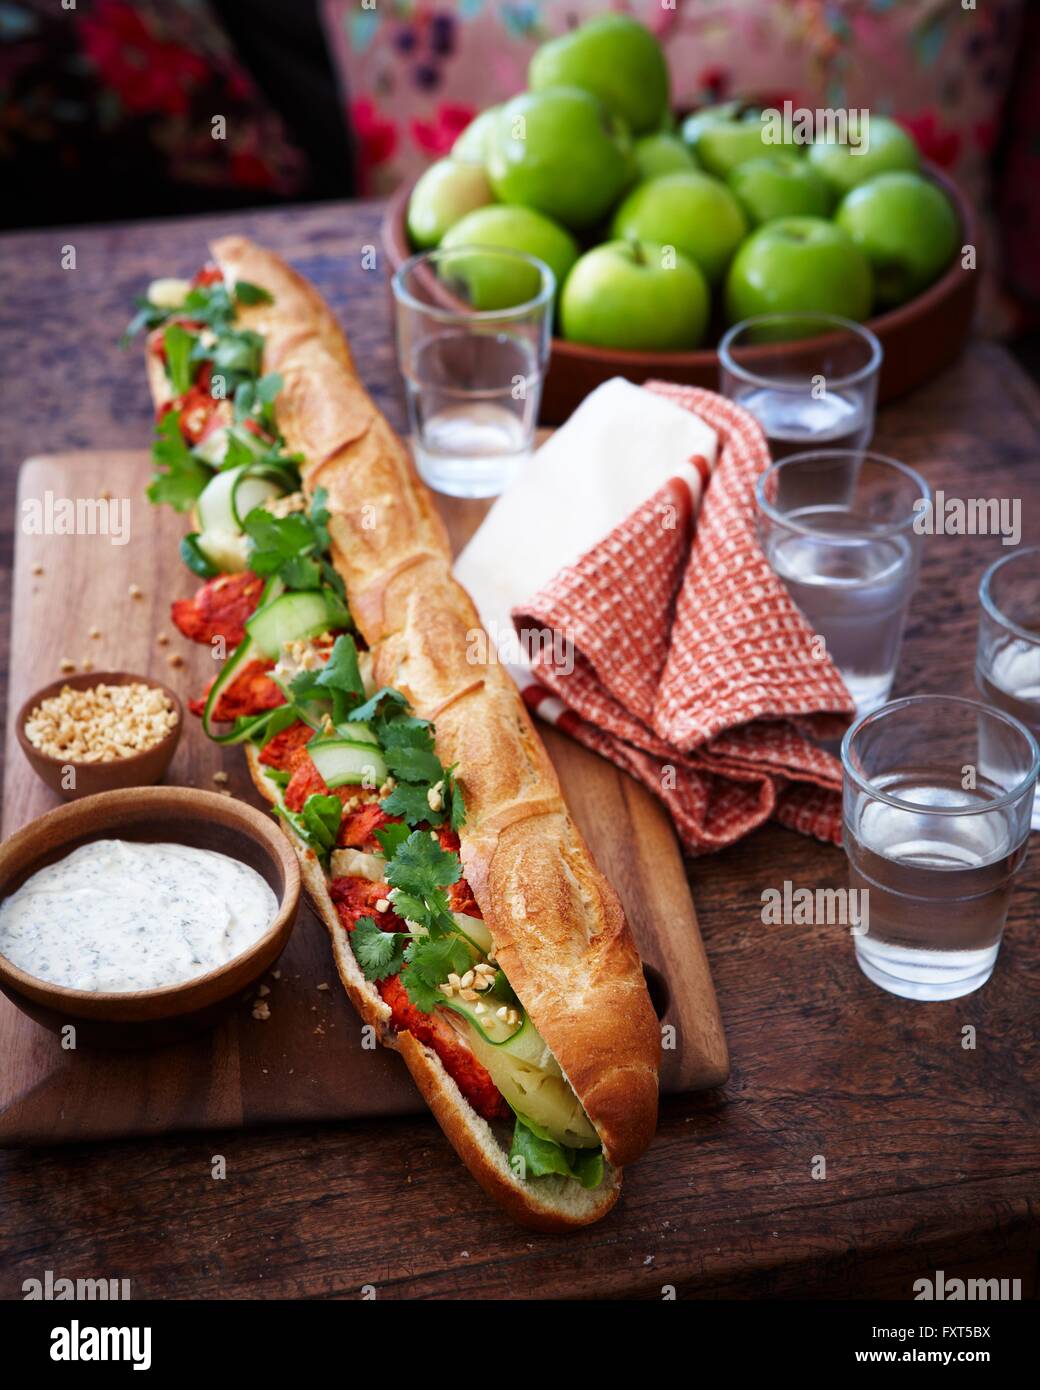 Tandoori chicken baguette and glasses of water on wooden table Stock Photo